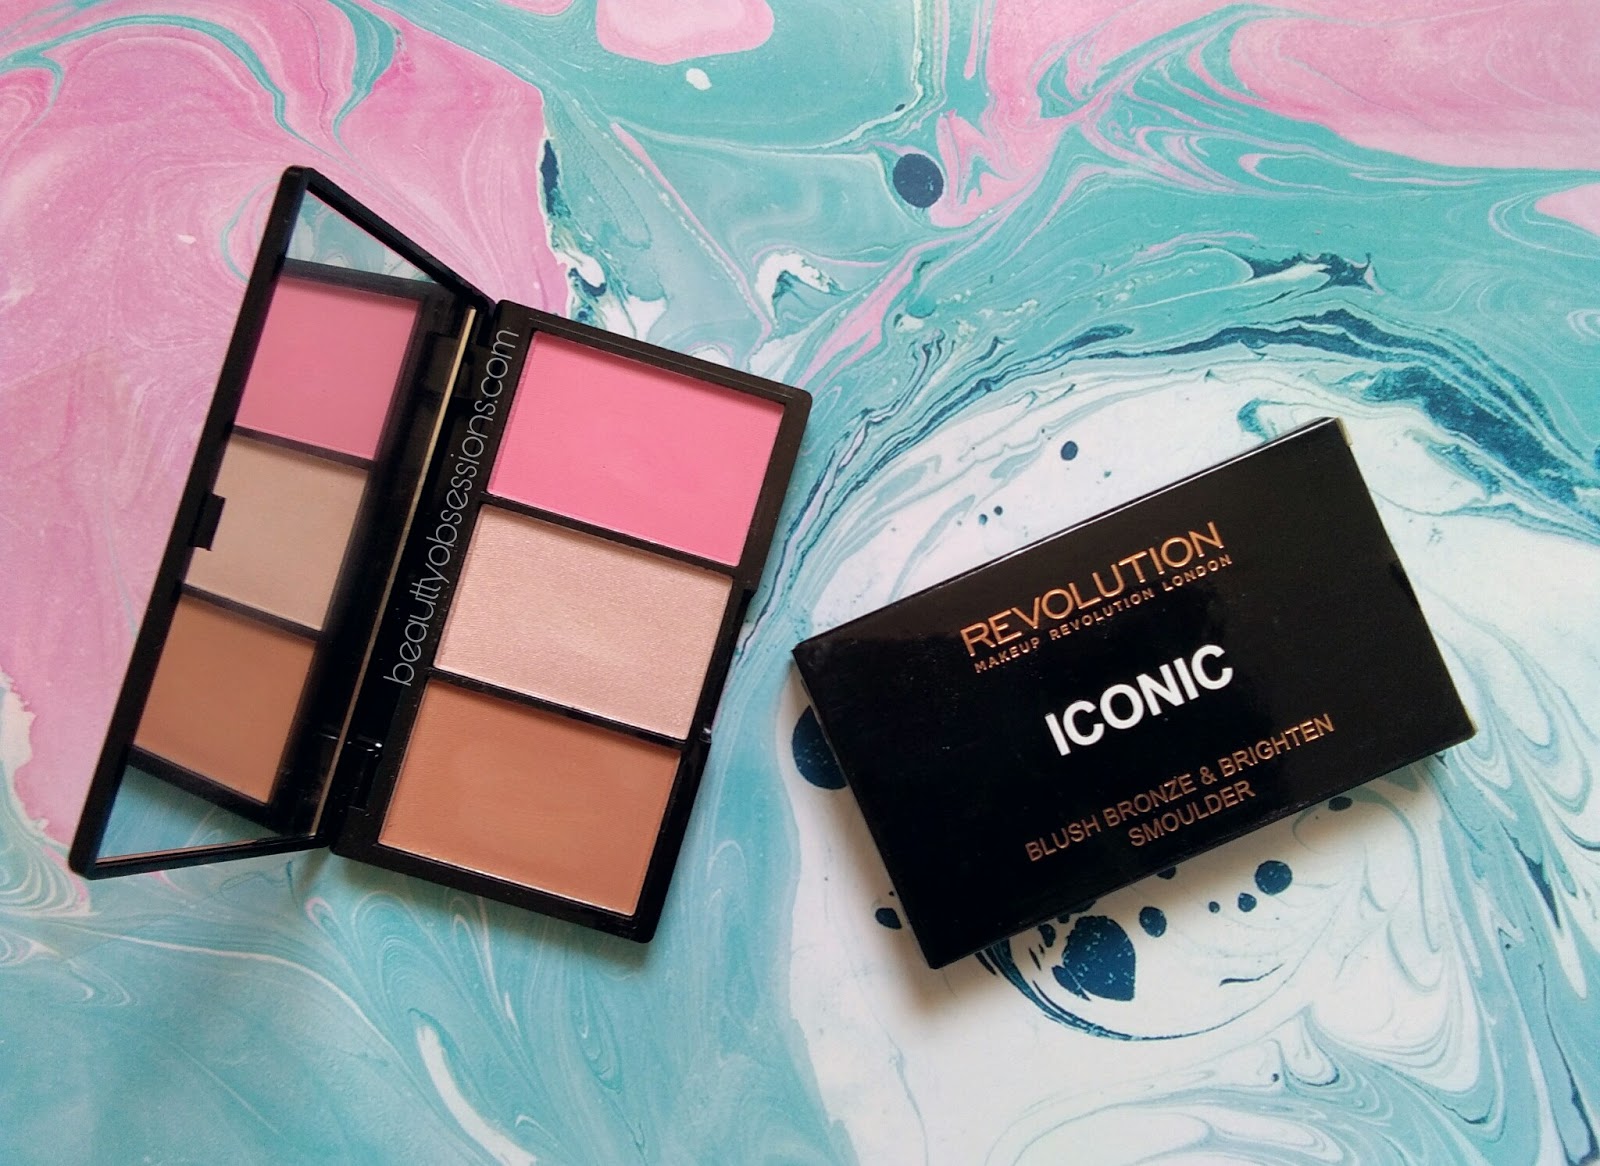 Makeup Revolution Iconic Blush, Brighten shade 'Smoulder' - Review